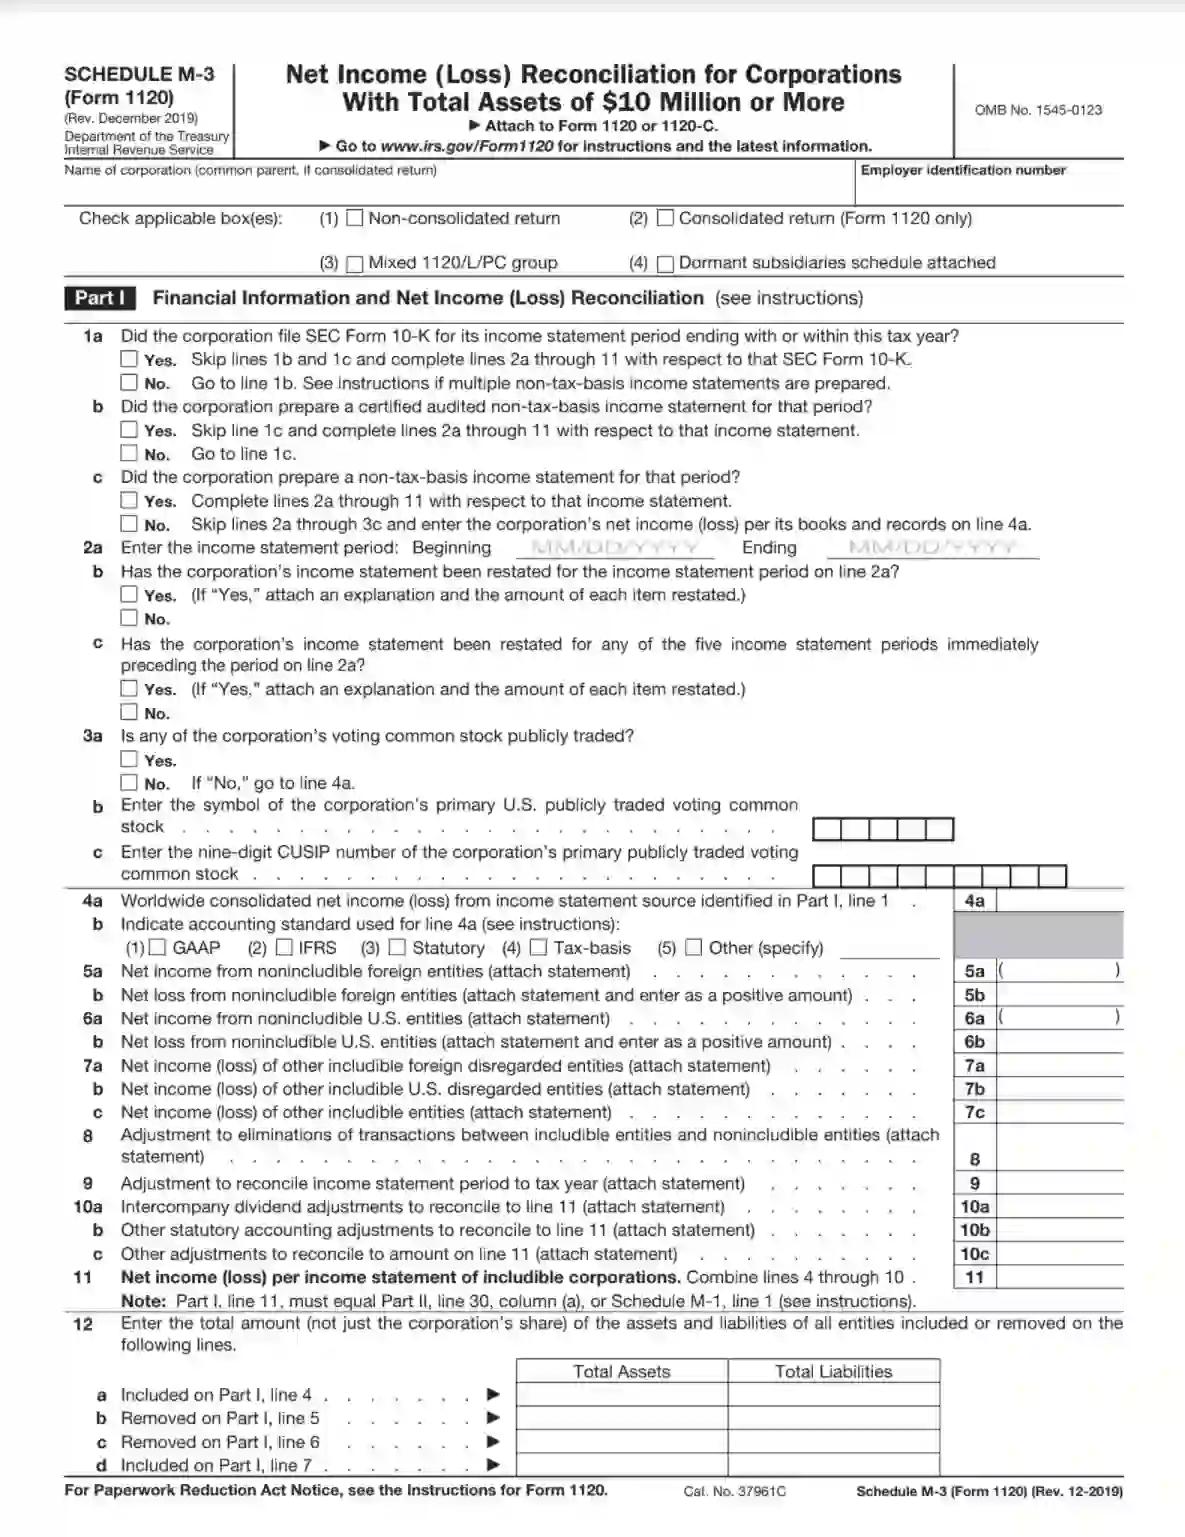 irs schedule m-3 form 1120